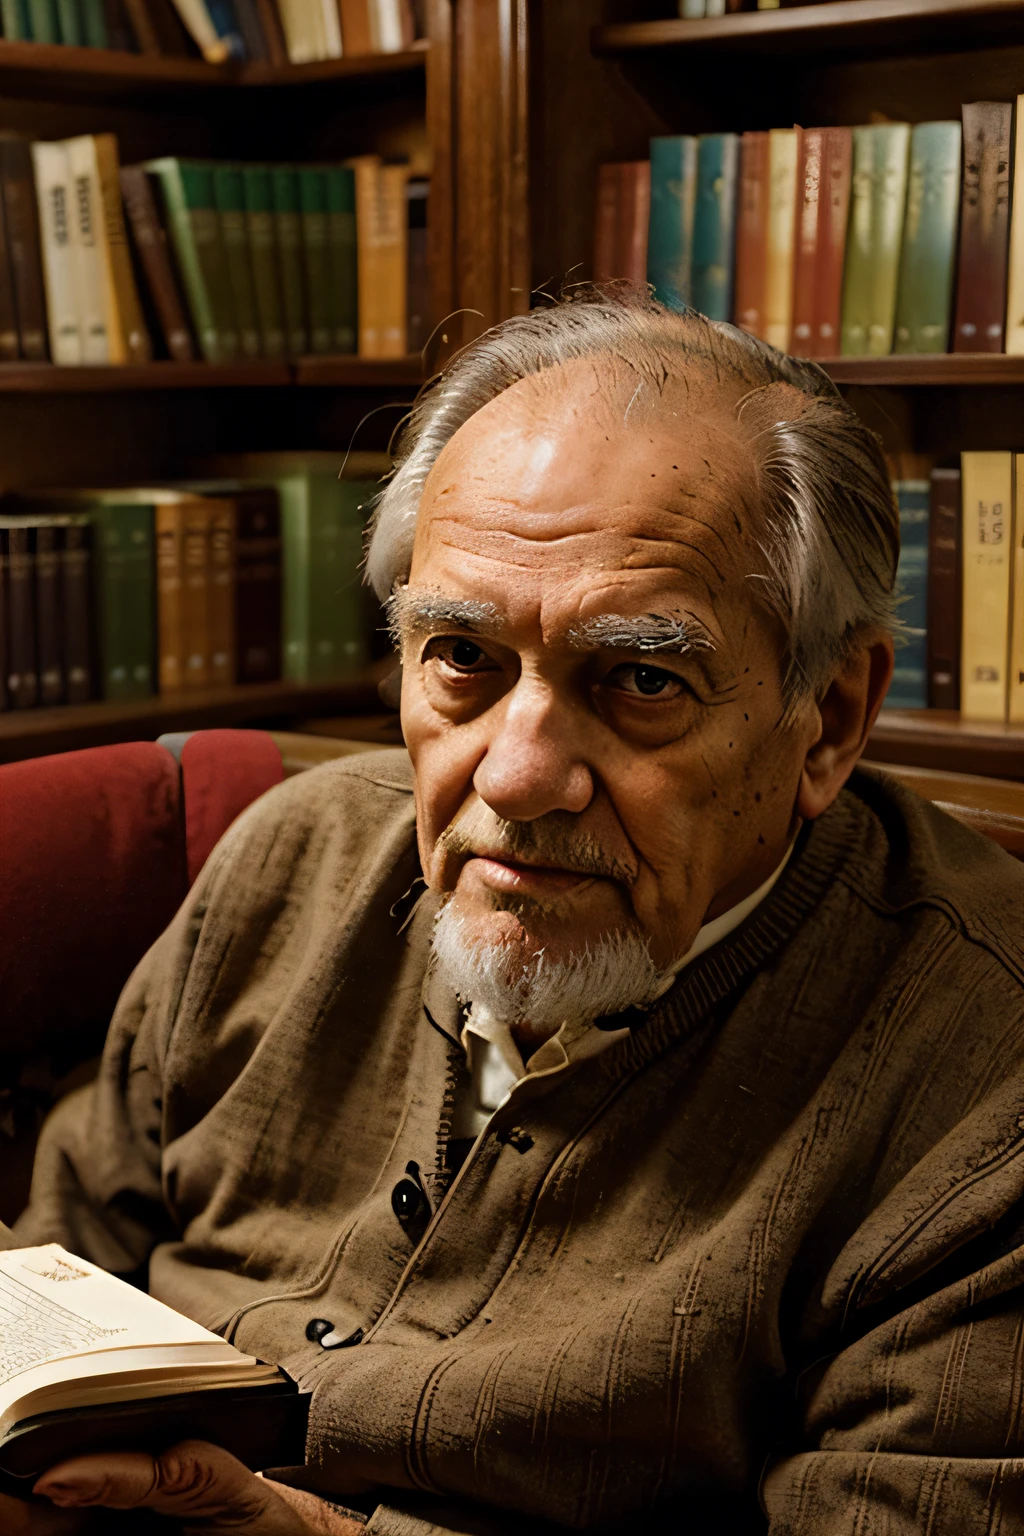 wise old man, in the library room, sitting on a chair holding a book, facing the camera, close up